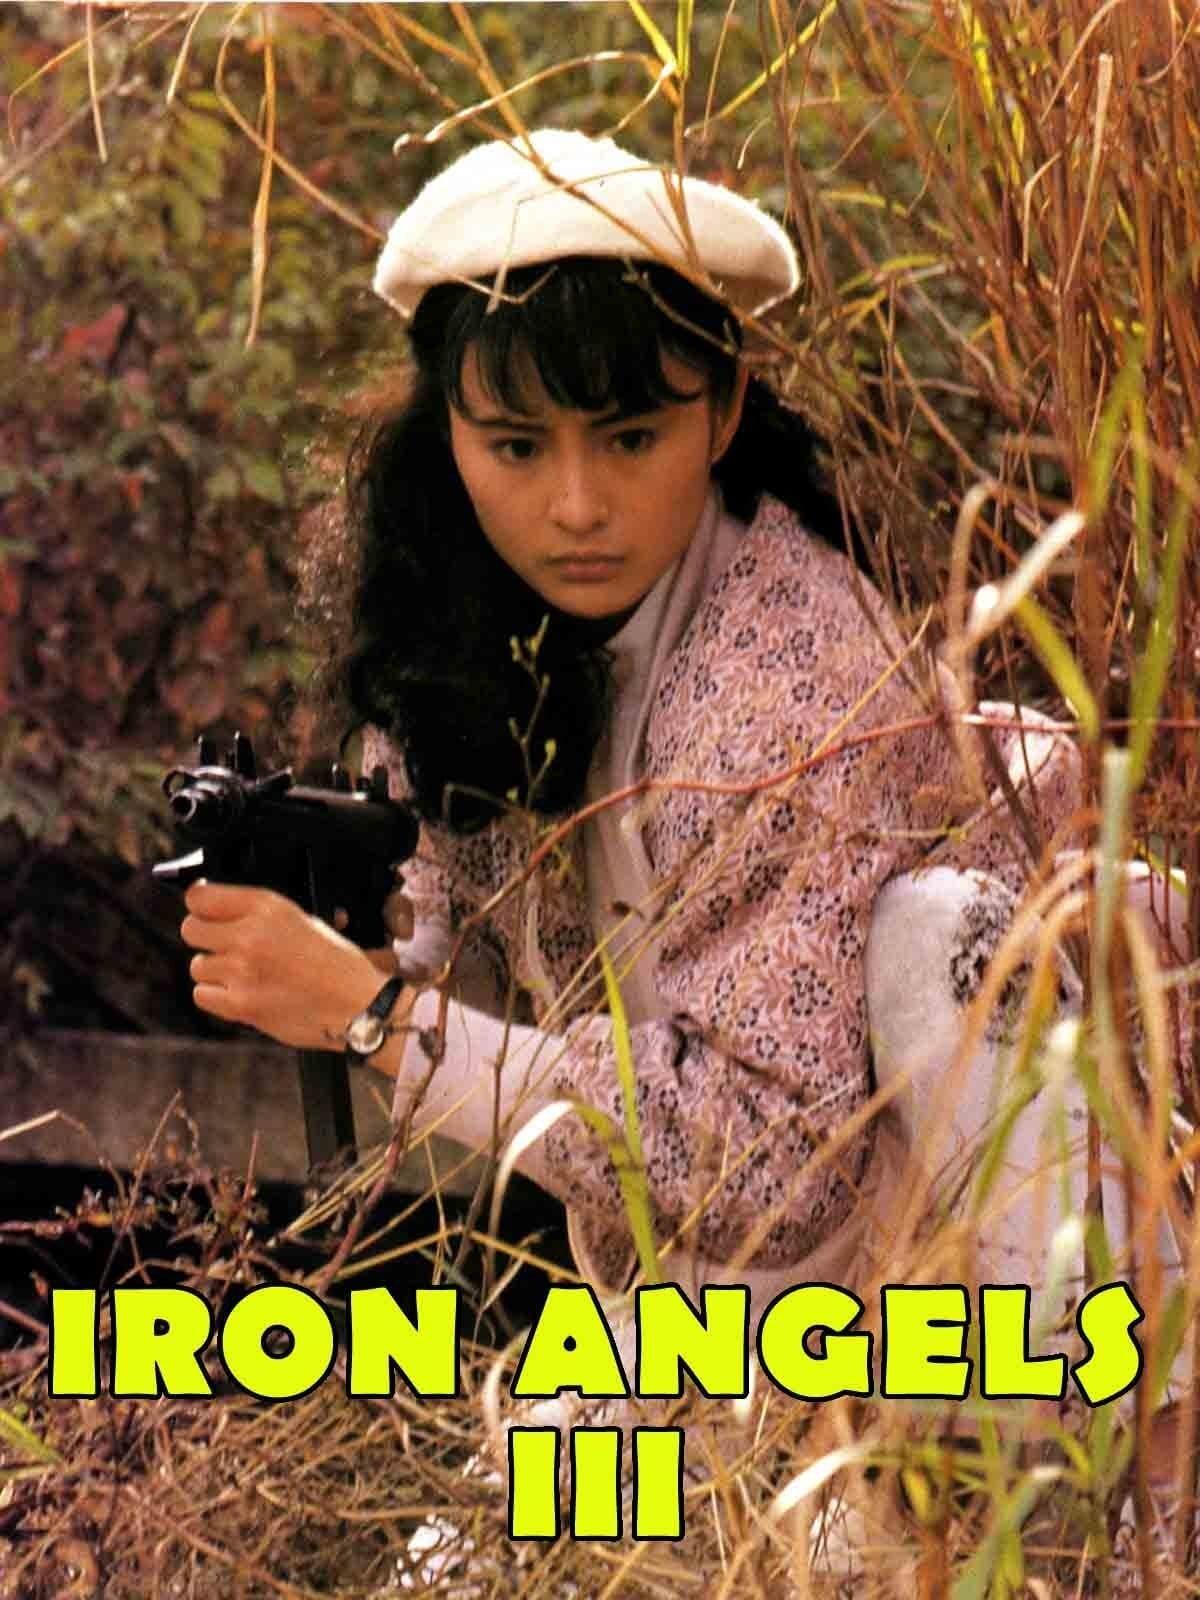 Iron Angels 3 poster